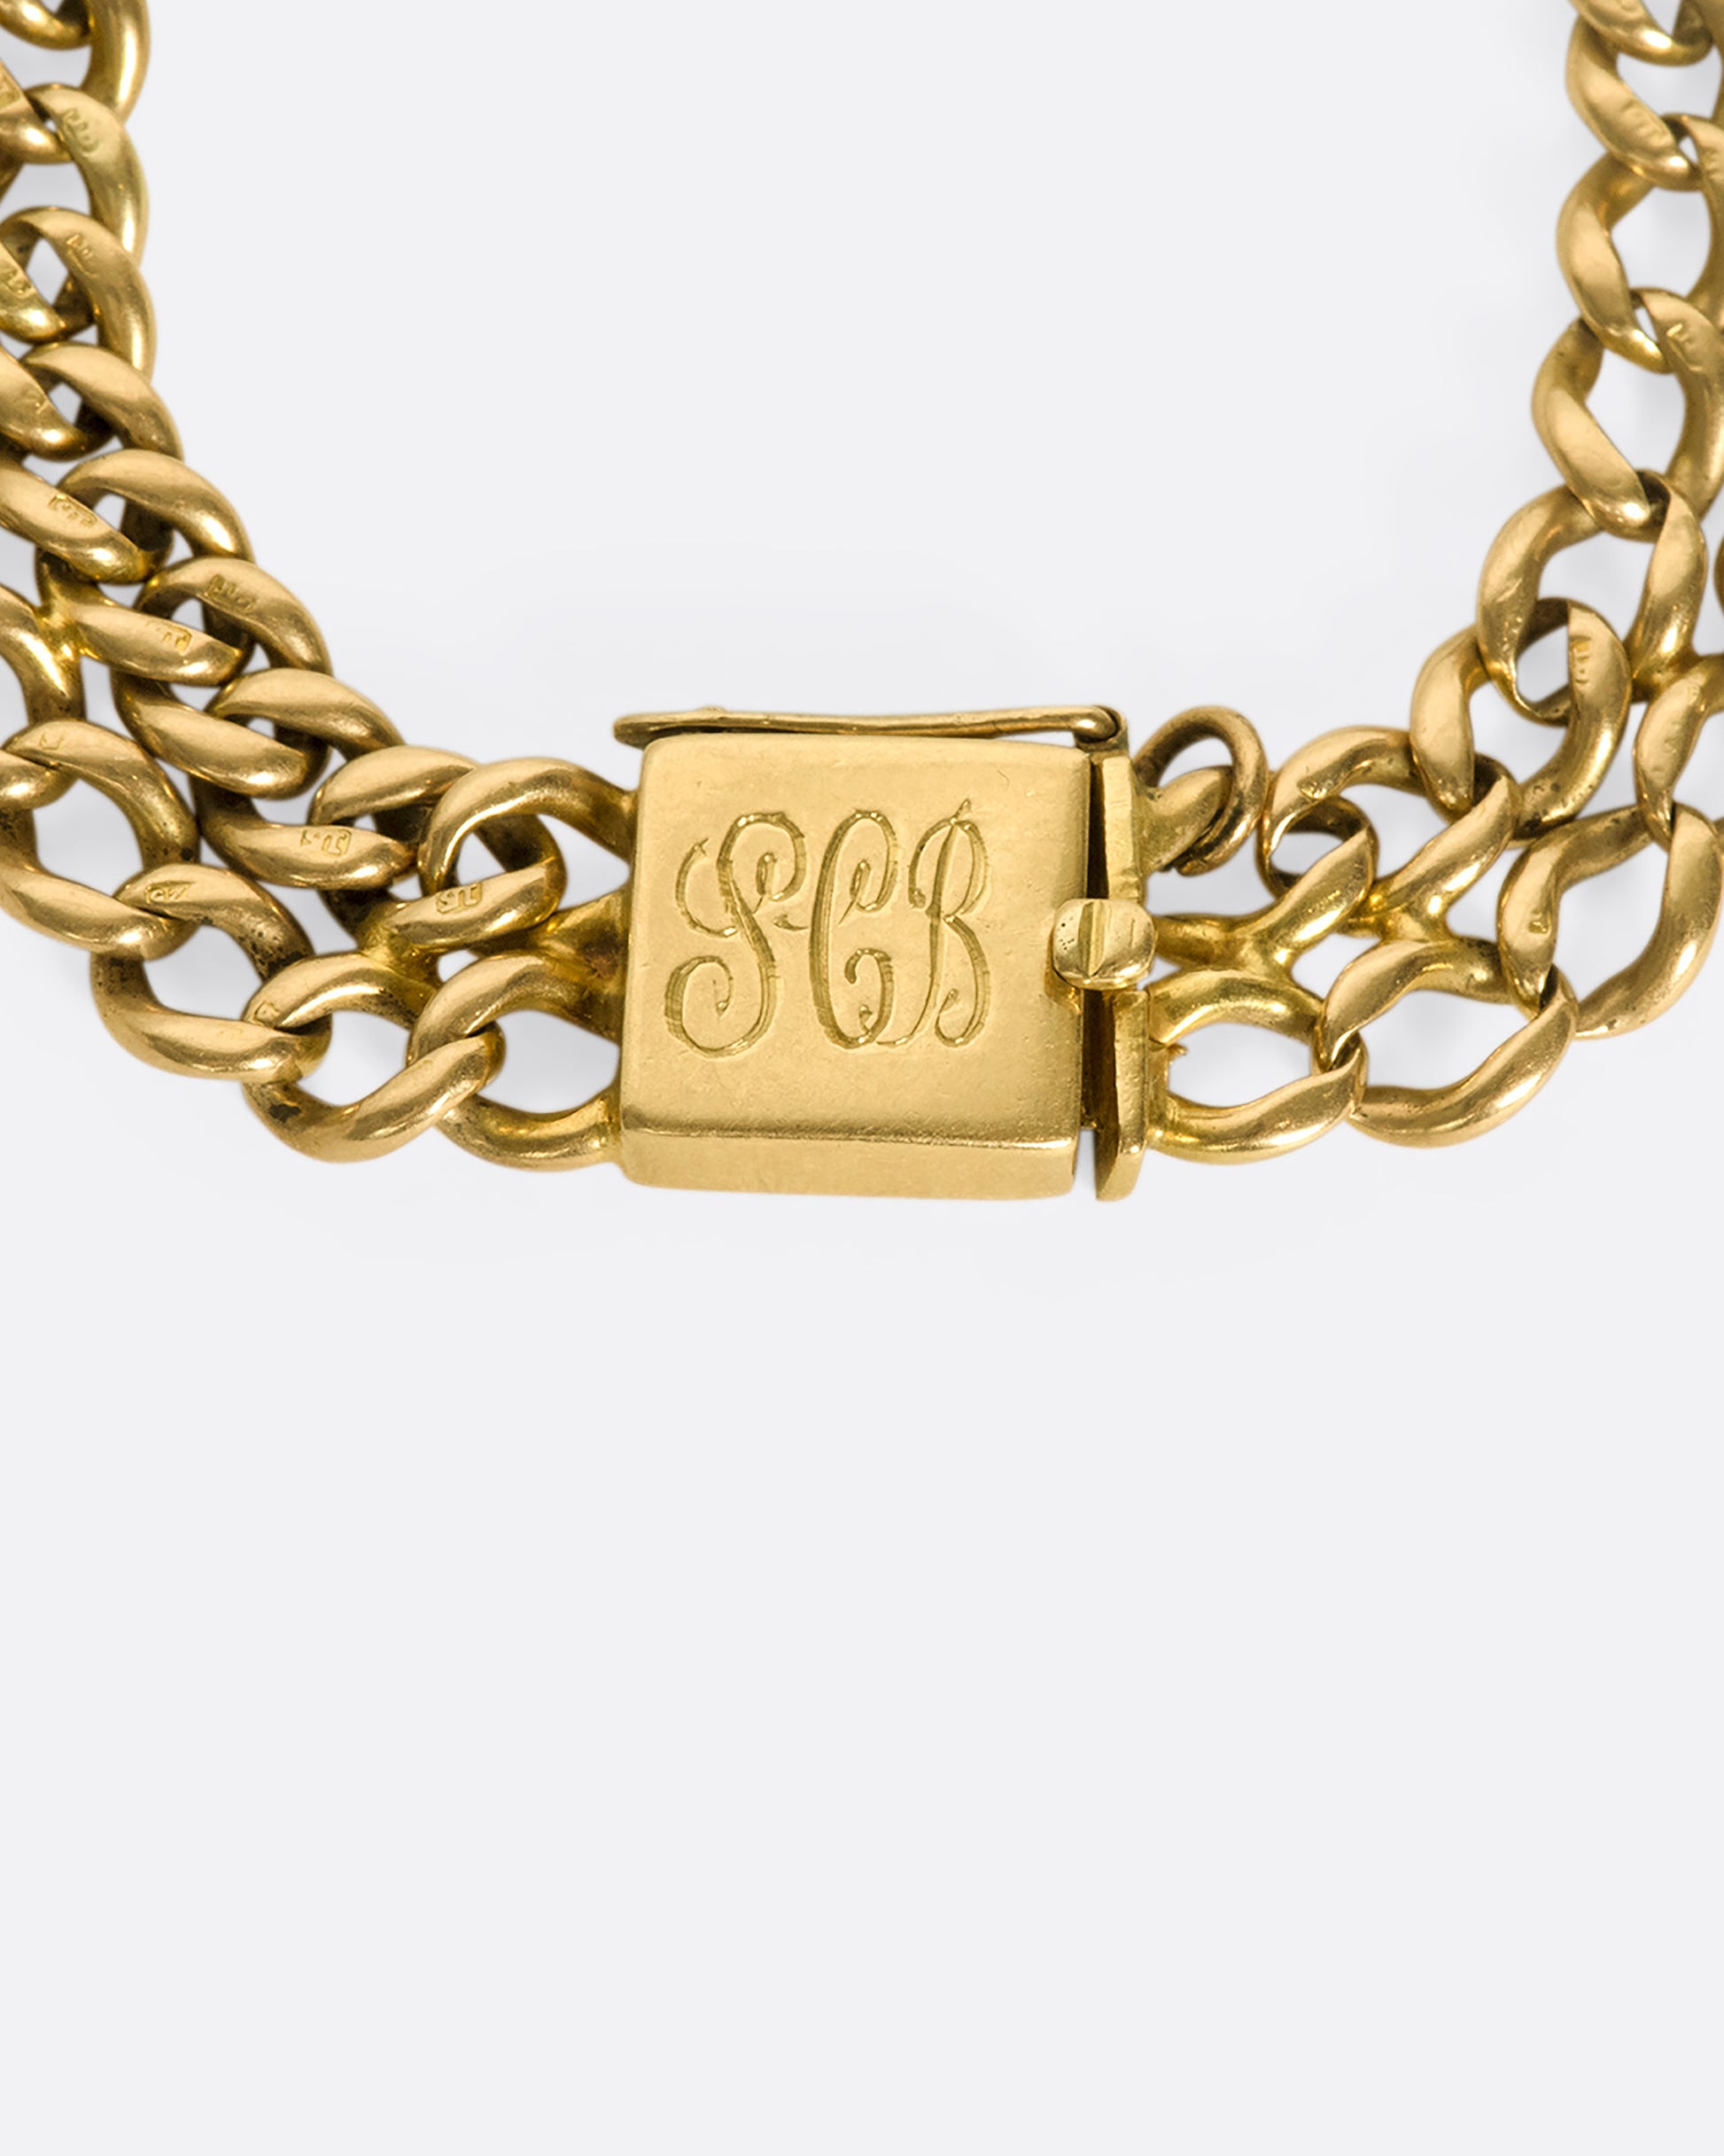 A 15k gold 1950s double-chain bracelet with substantial square clasp, engraved SCB.